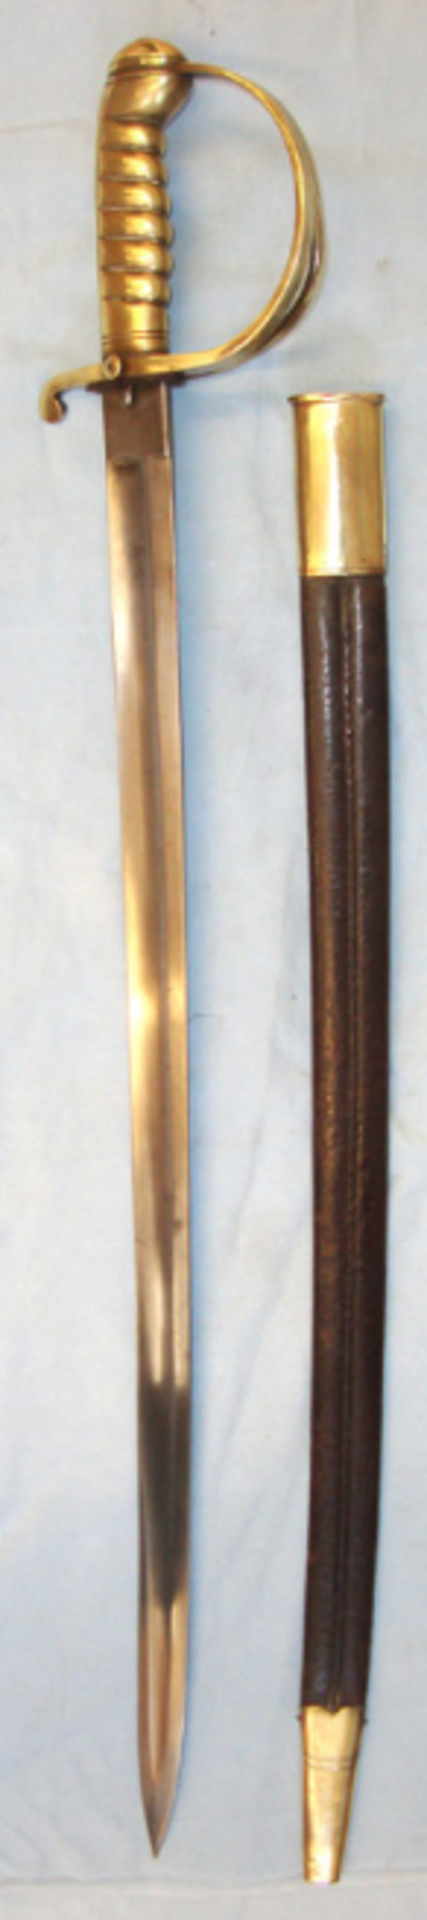 Victorian British River Police Cutlass With Crown Inspection Mark & Scabbard